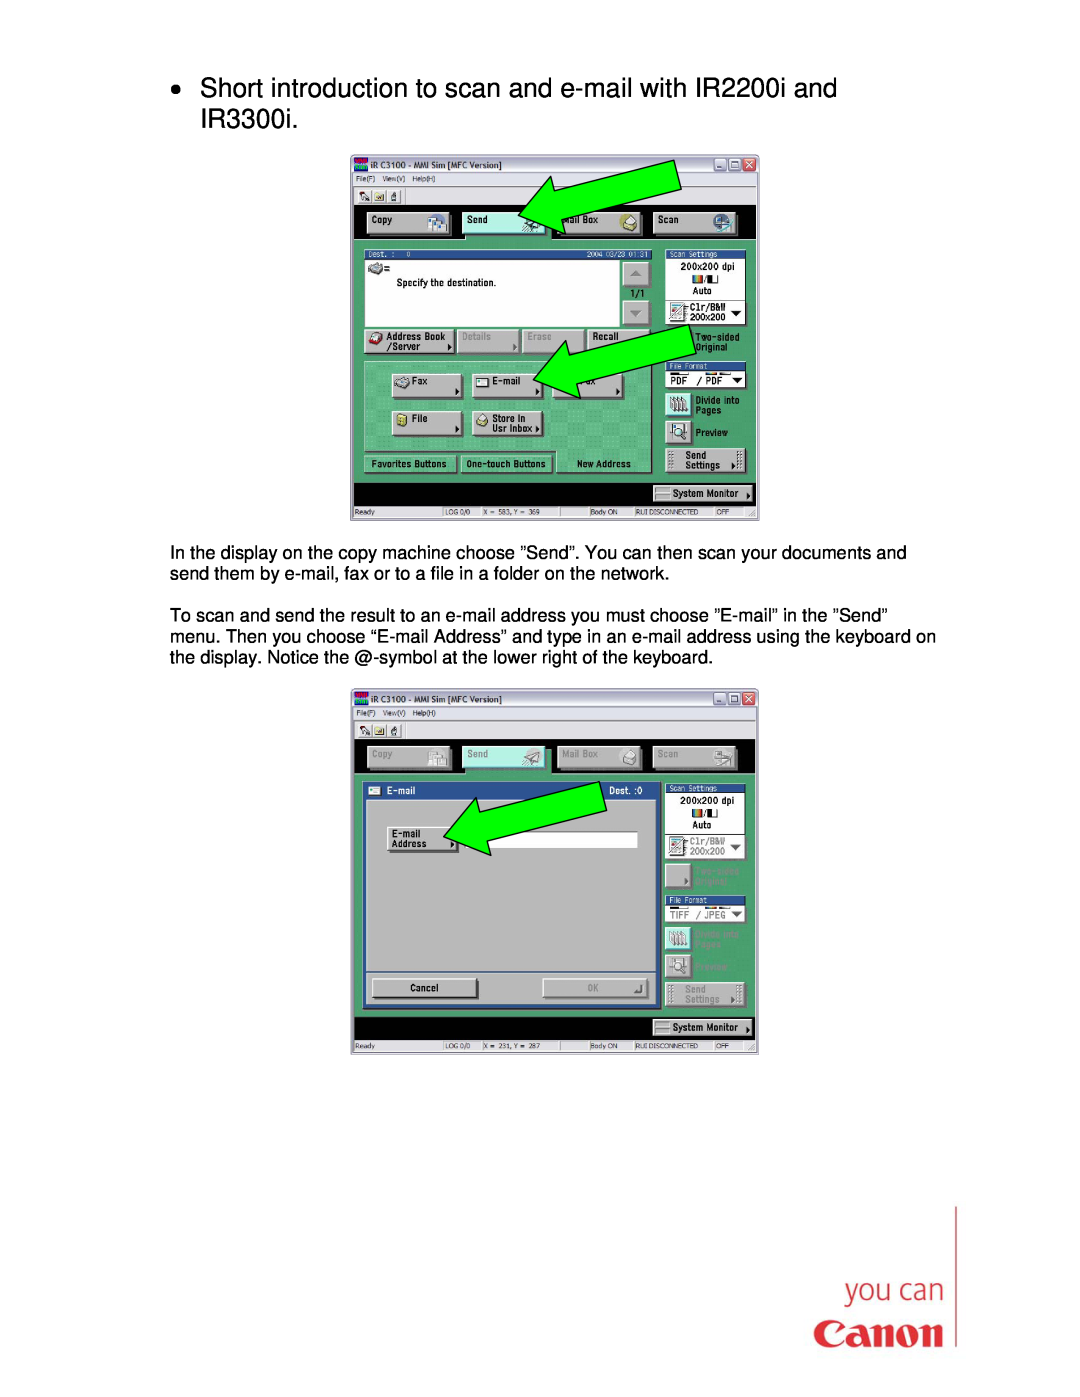 Canon user manual Short introduction to scan and e-mail with IR2200i and IR3300i, Side 10 af 